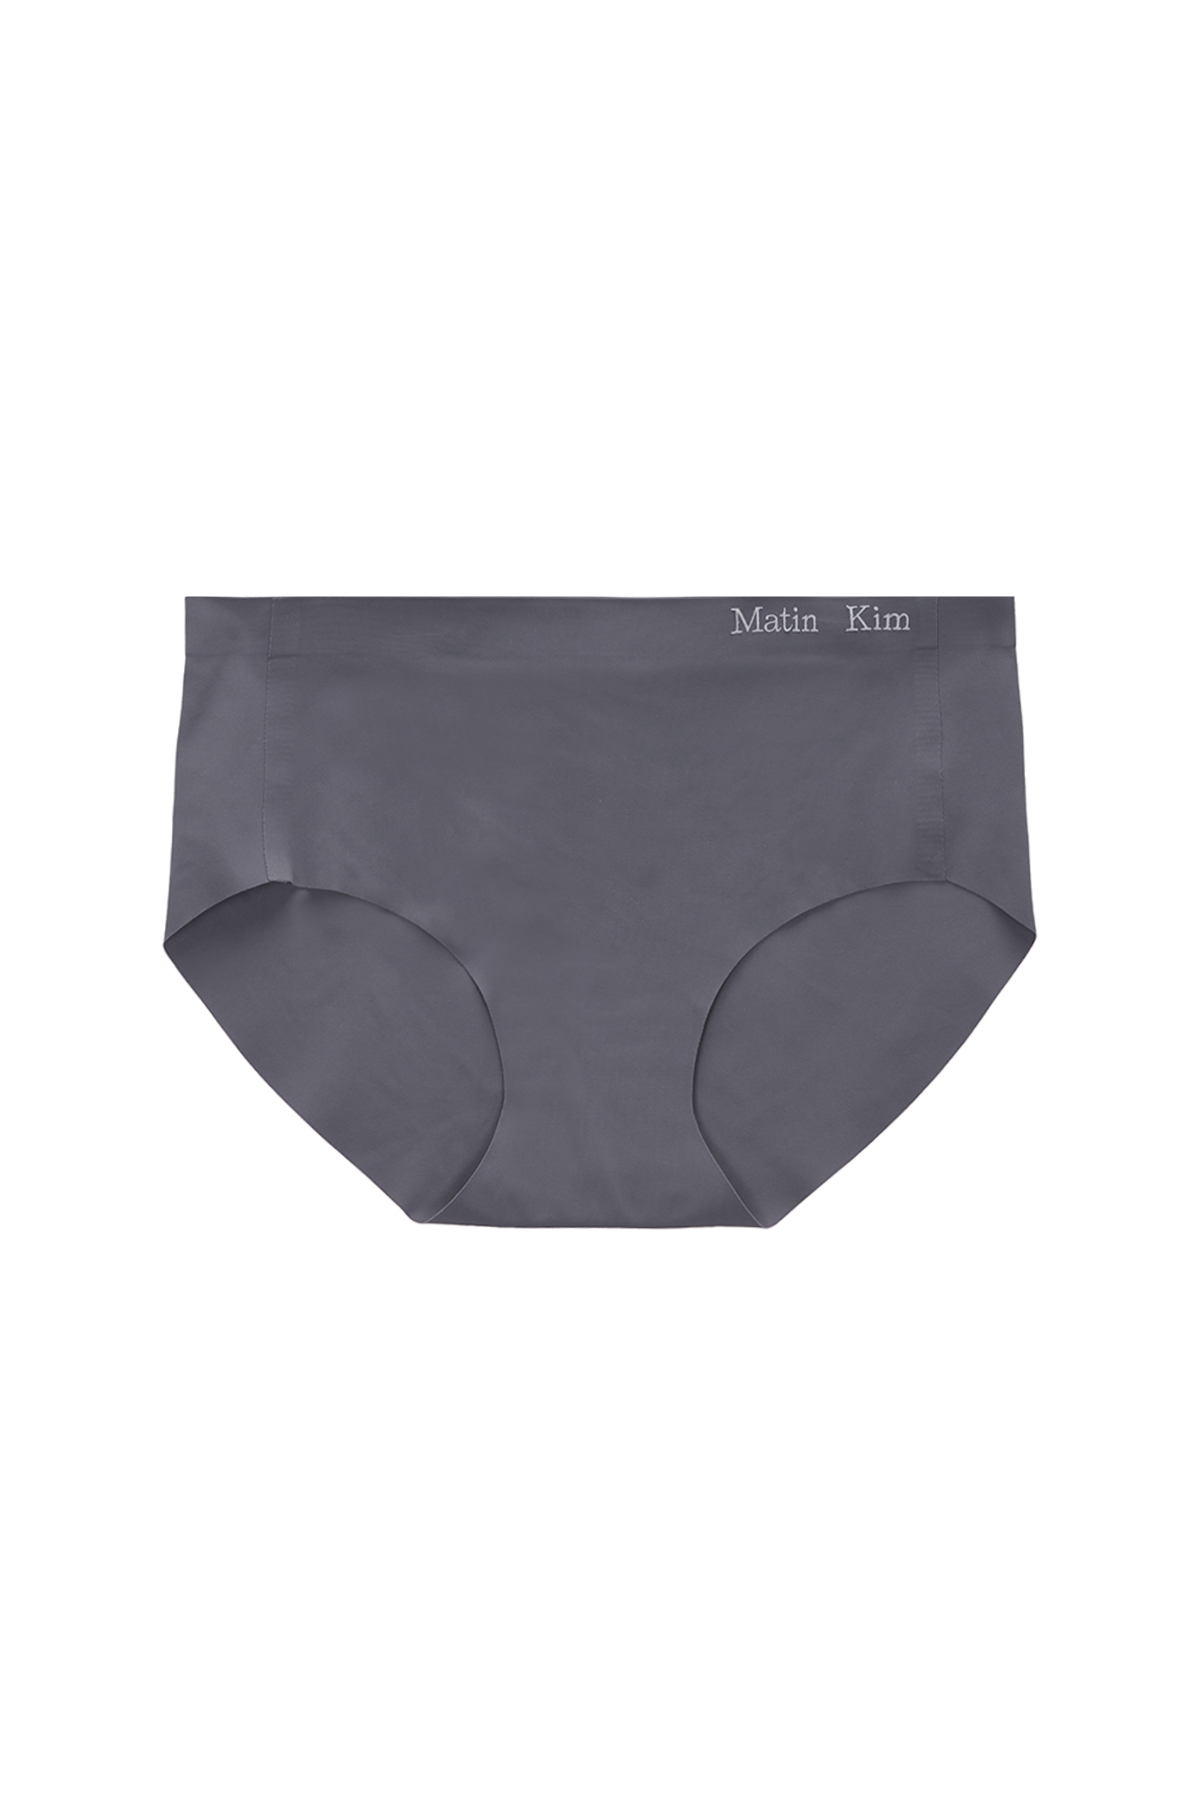 COMFY SEAMLESS BRIEF IN CHARCOAL